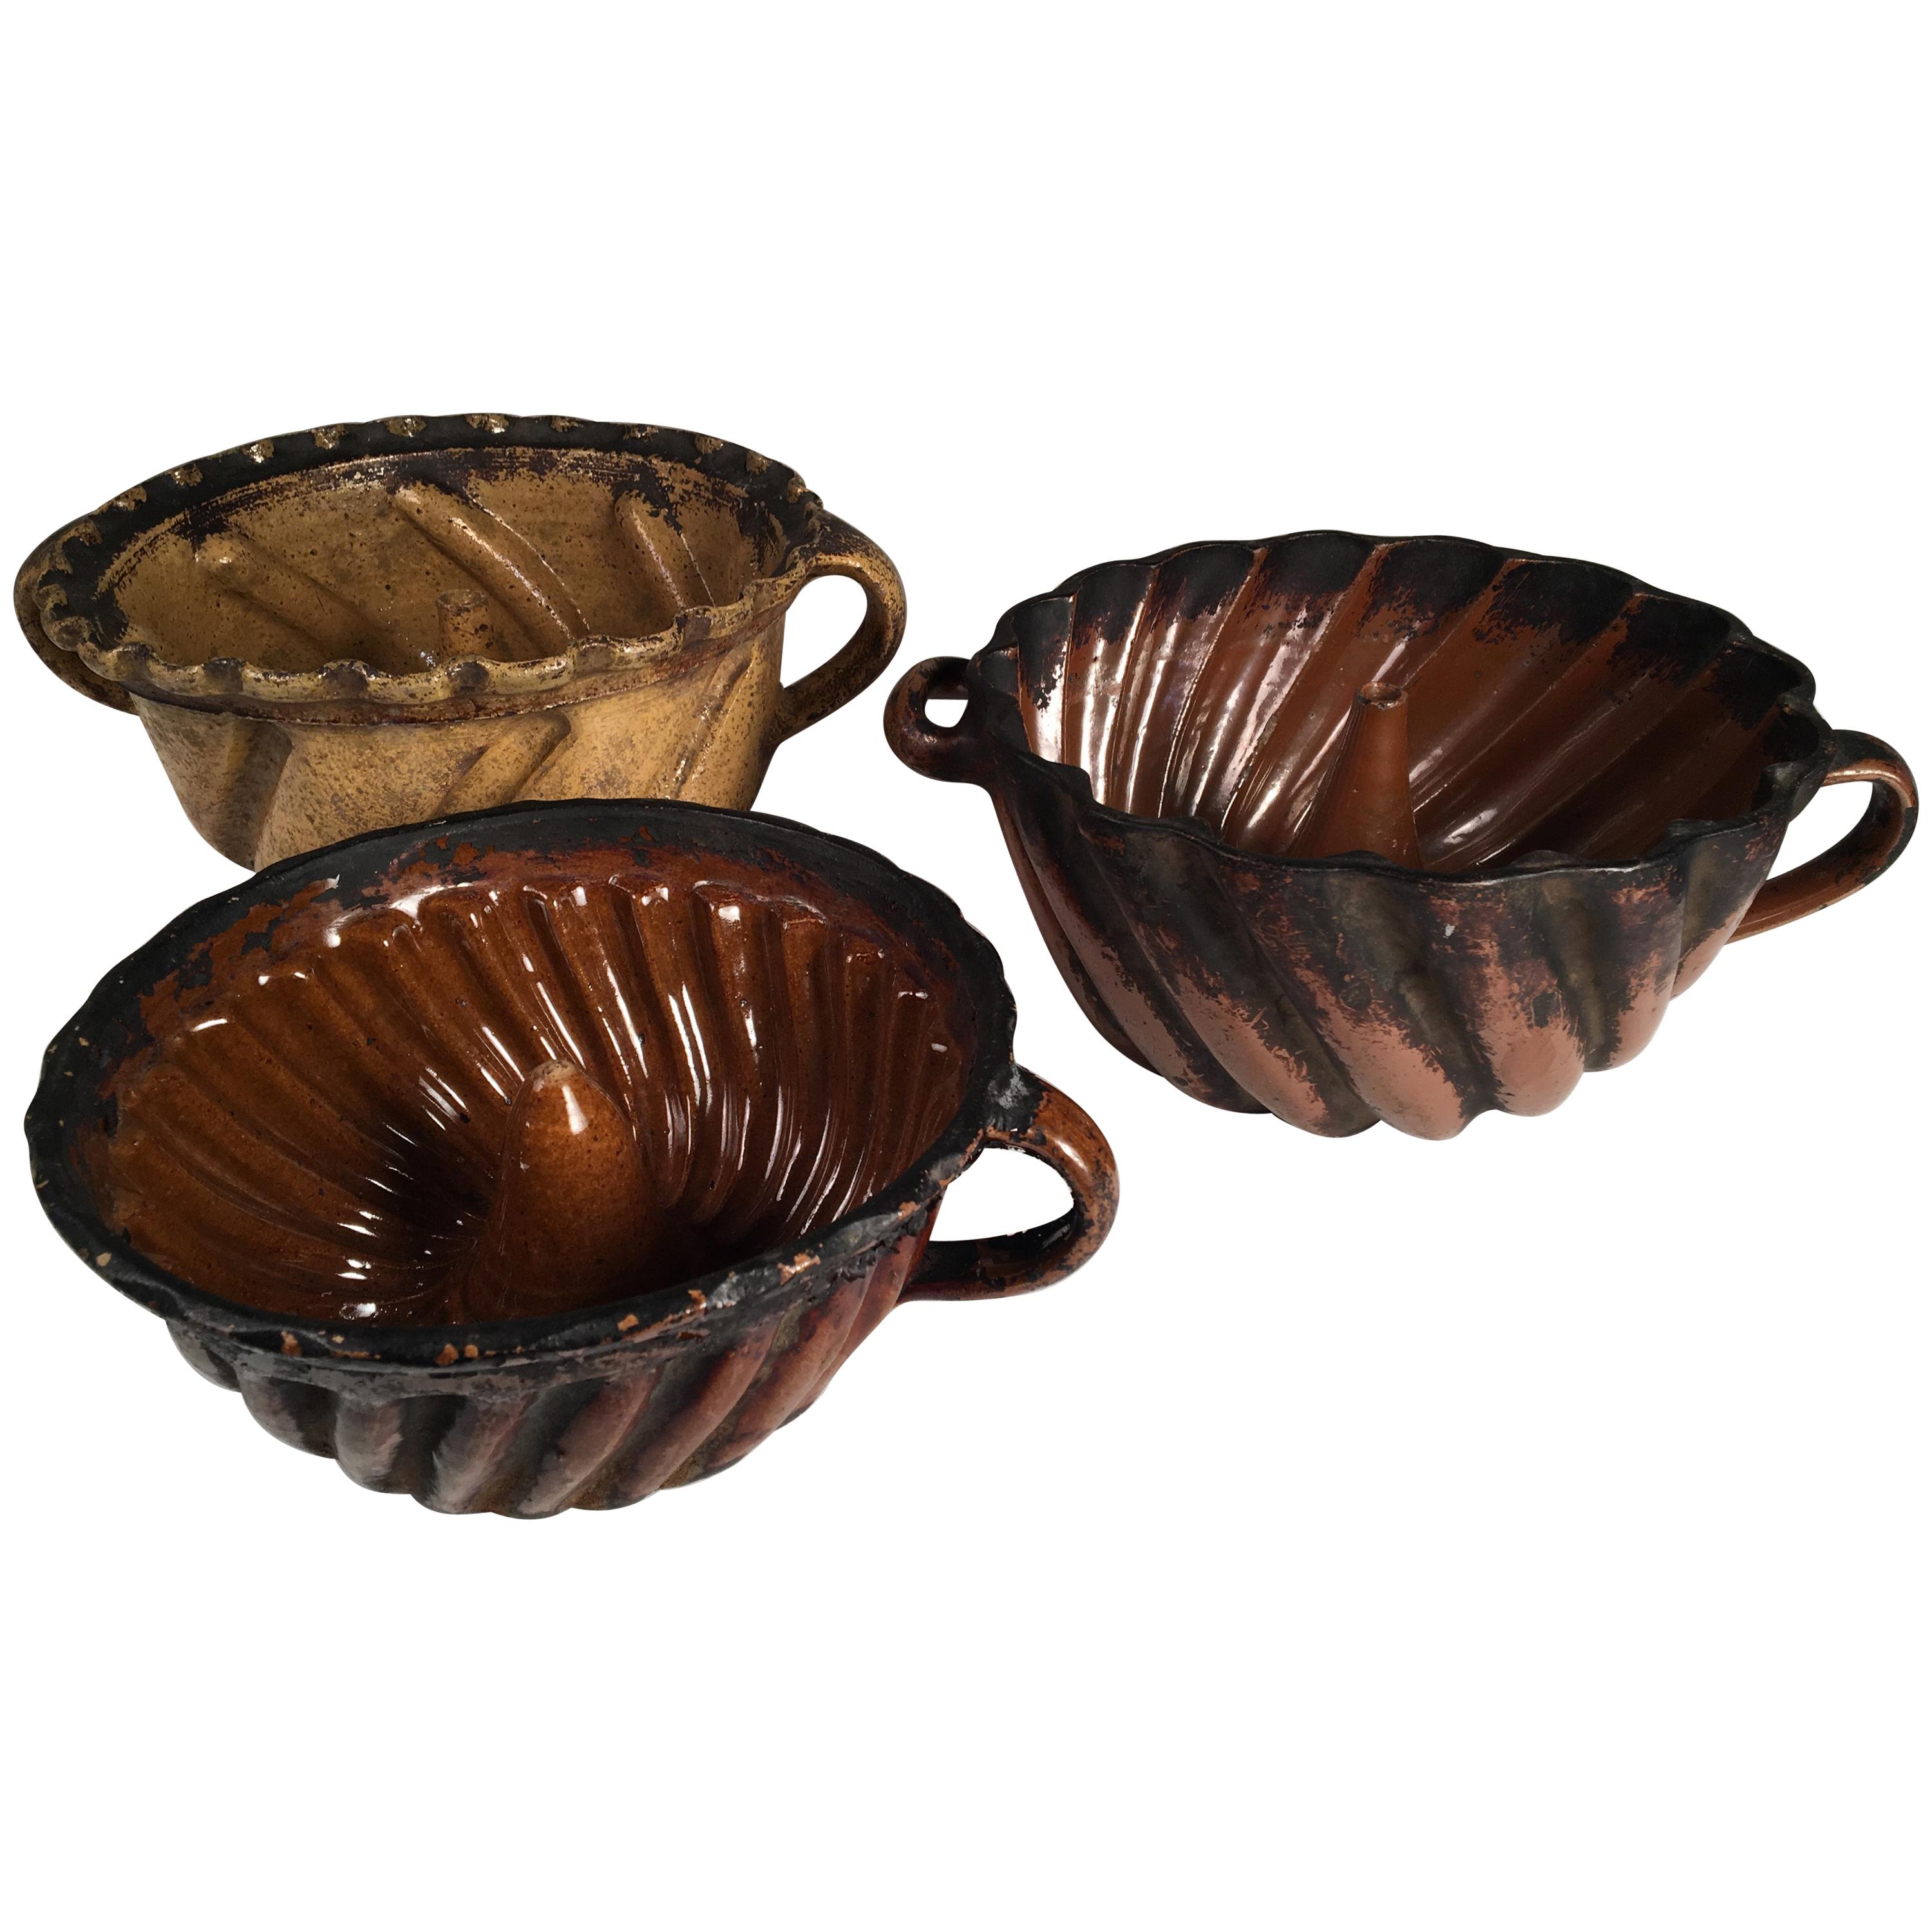 Collection of 3 Pennsylvania Redware "Turk's Head" Cake Molds, 18th Century